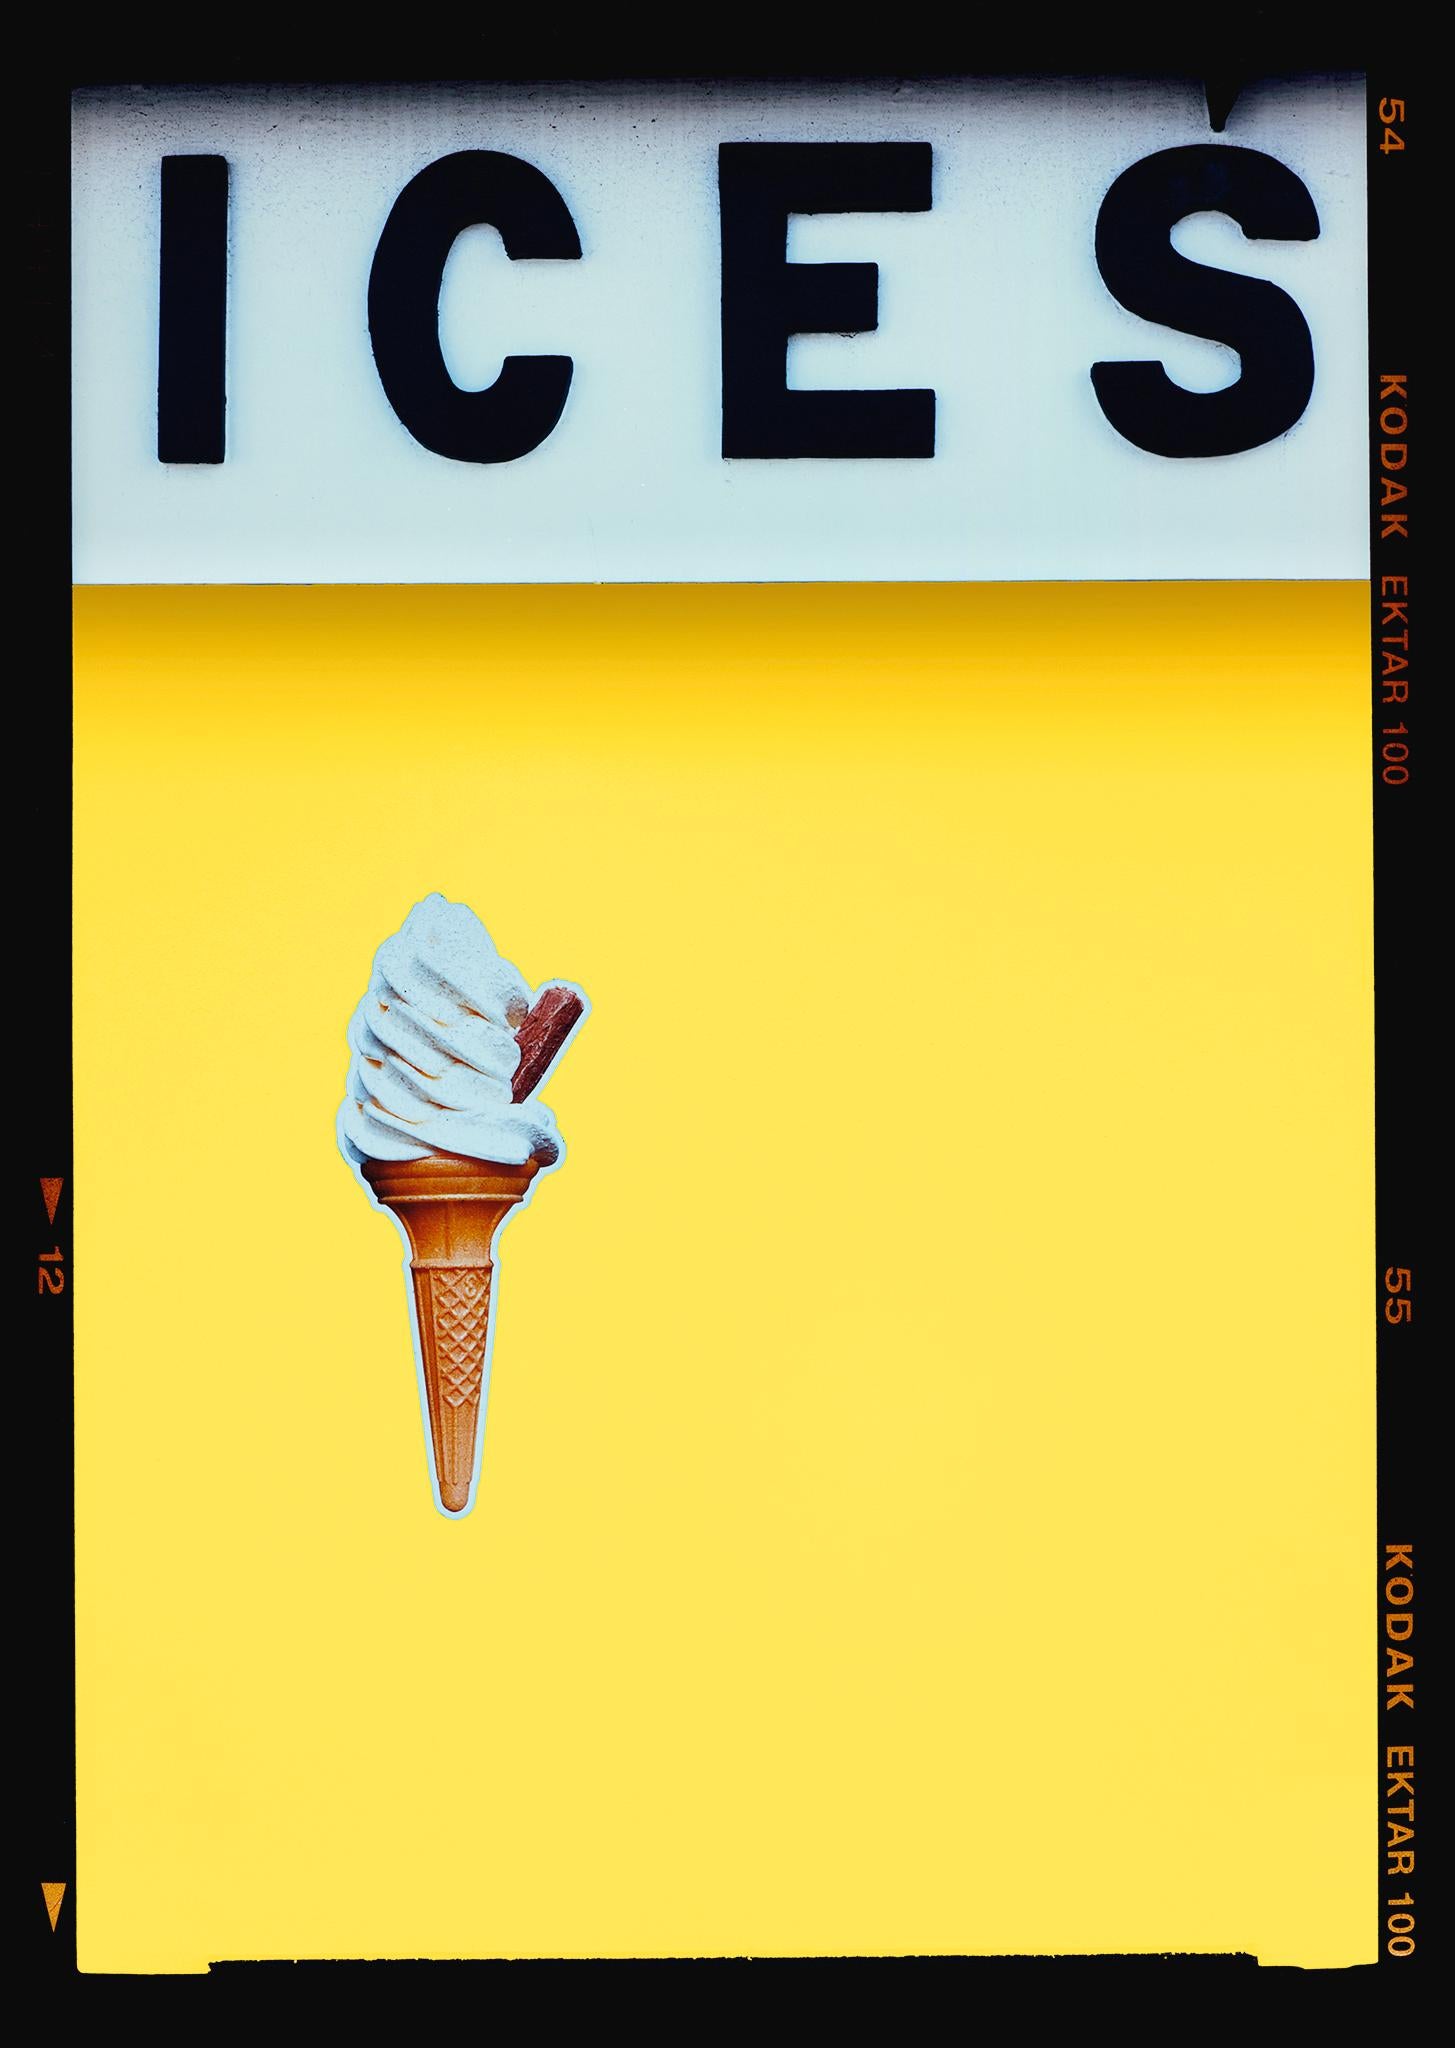 Ices (Sherbet Yellow), Bexhill-on-Sea - British seaside color photography